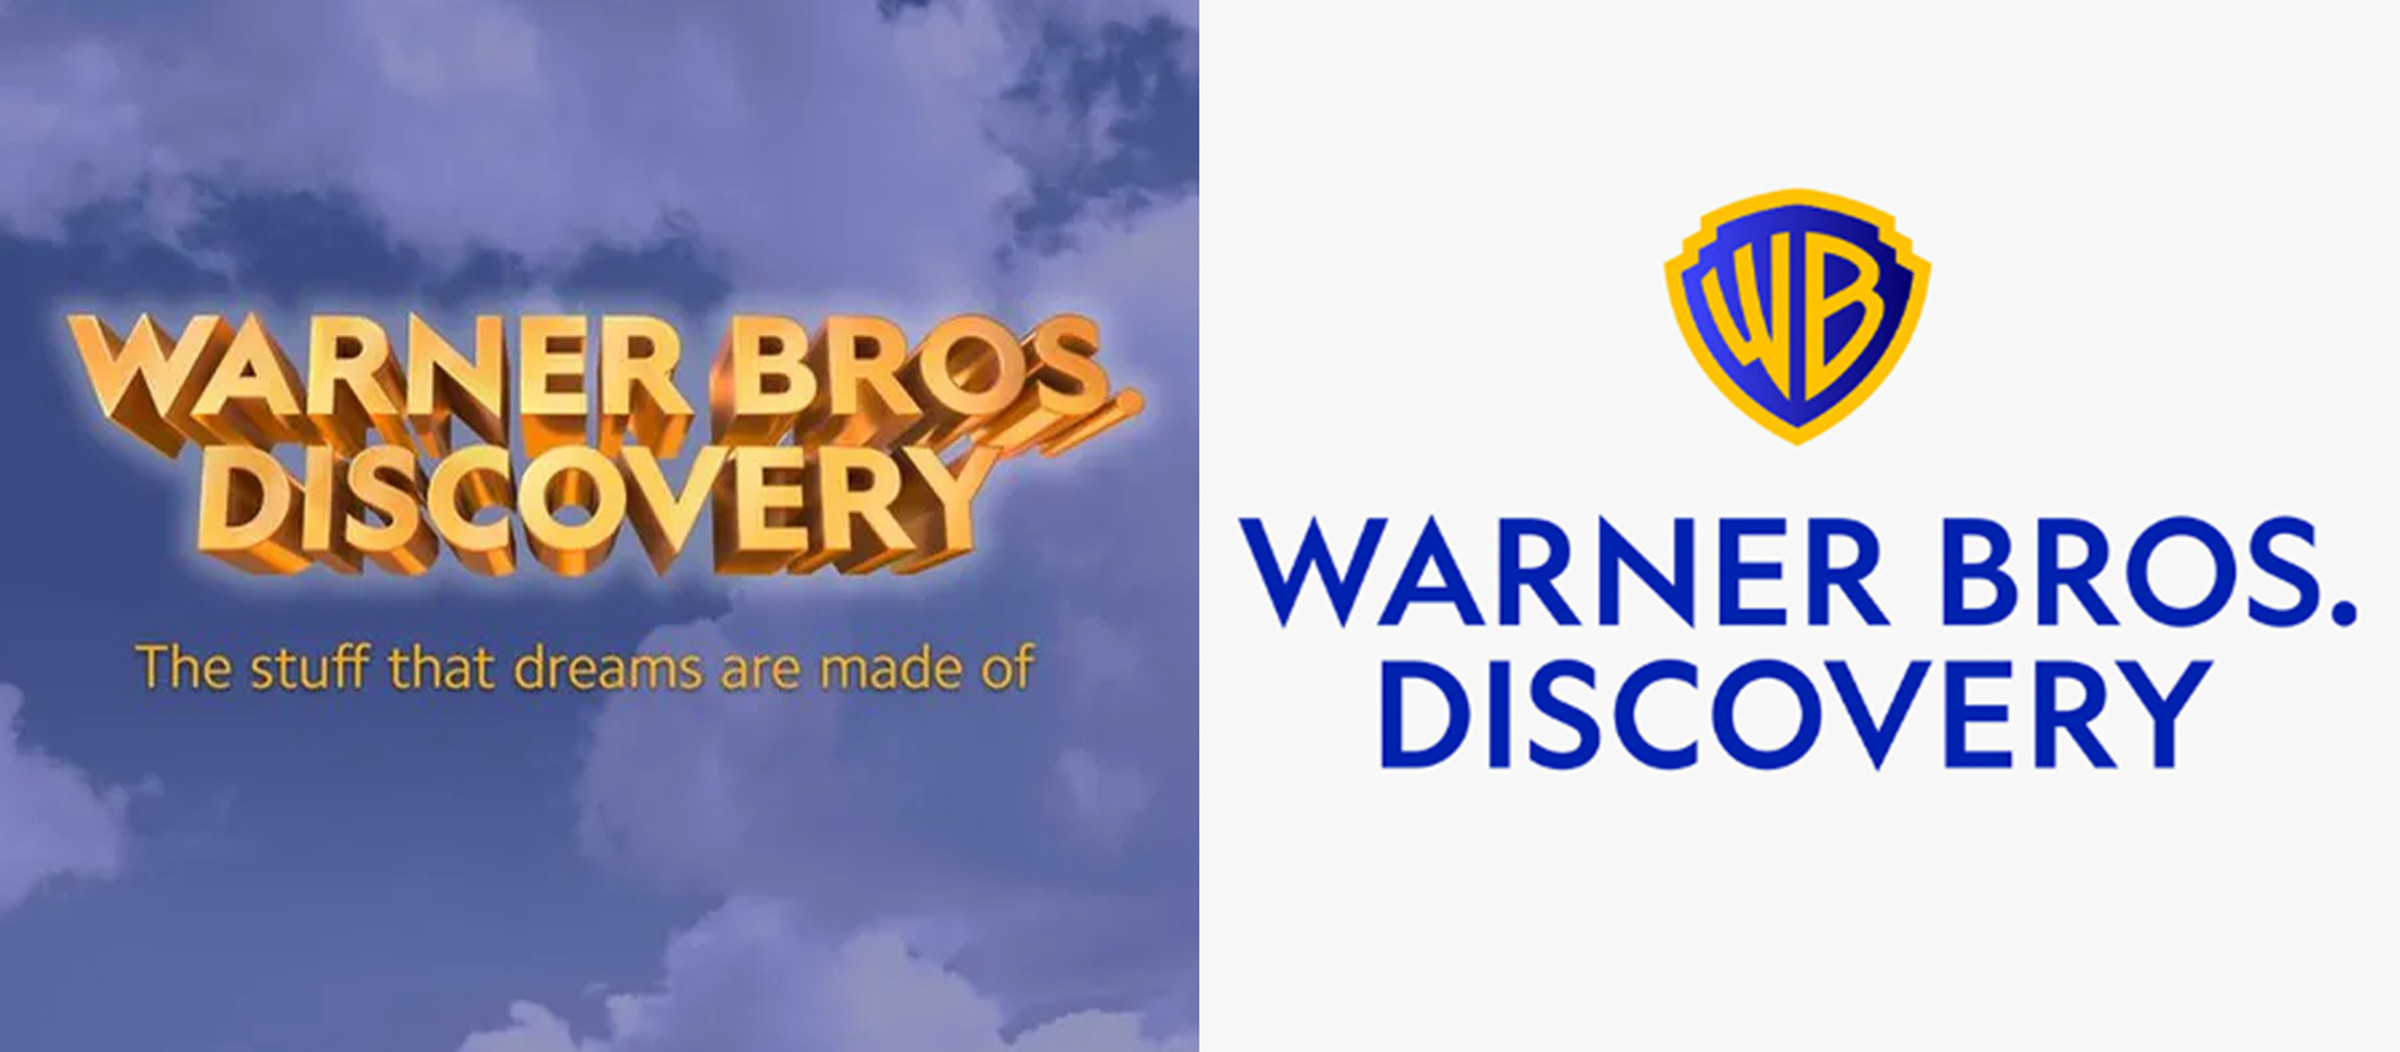 A comparison of the two logos, with the text-only Warner Bros. Discovery graphic on the left, and one with a version of the traditional WB shield on the right.